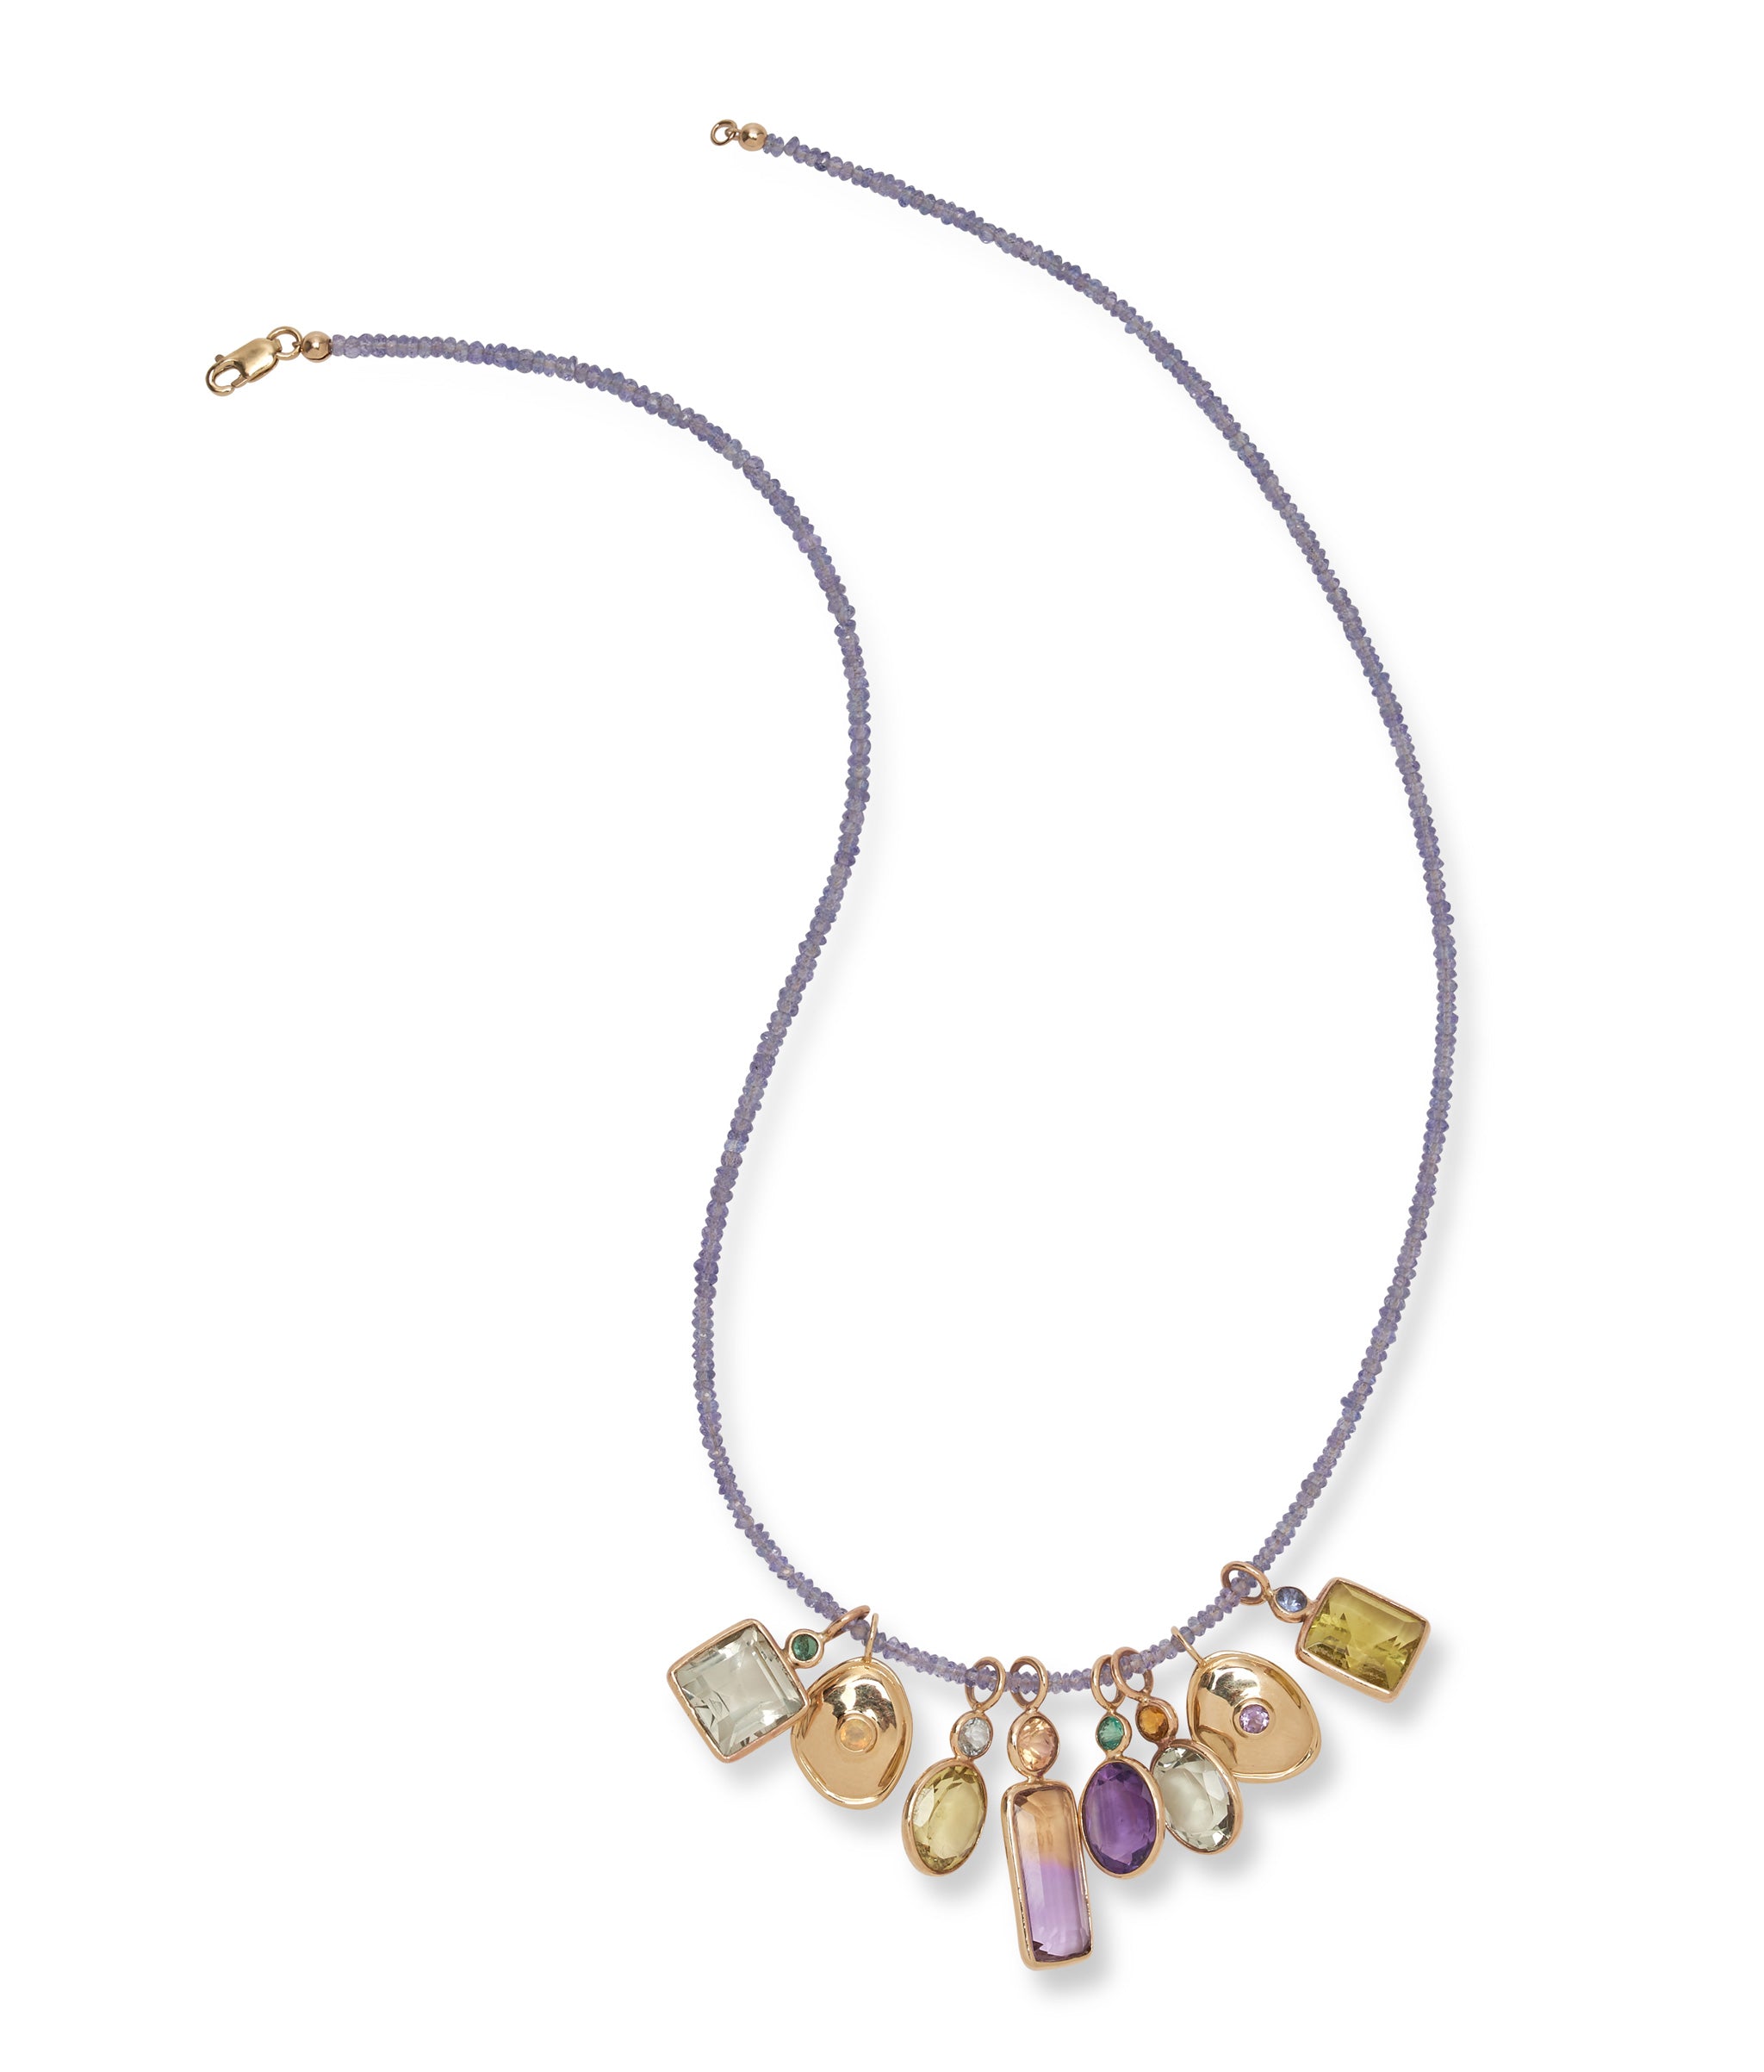 Tiny Beaded 14k Gold and Tanzanite Necklace with assorted semiprecious charms.